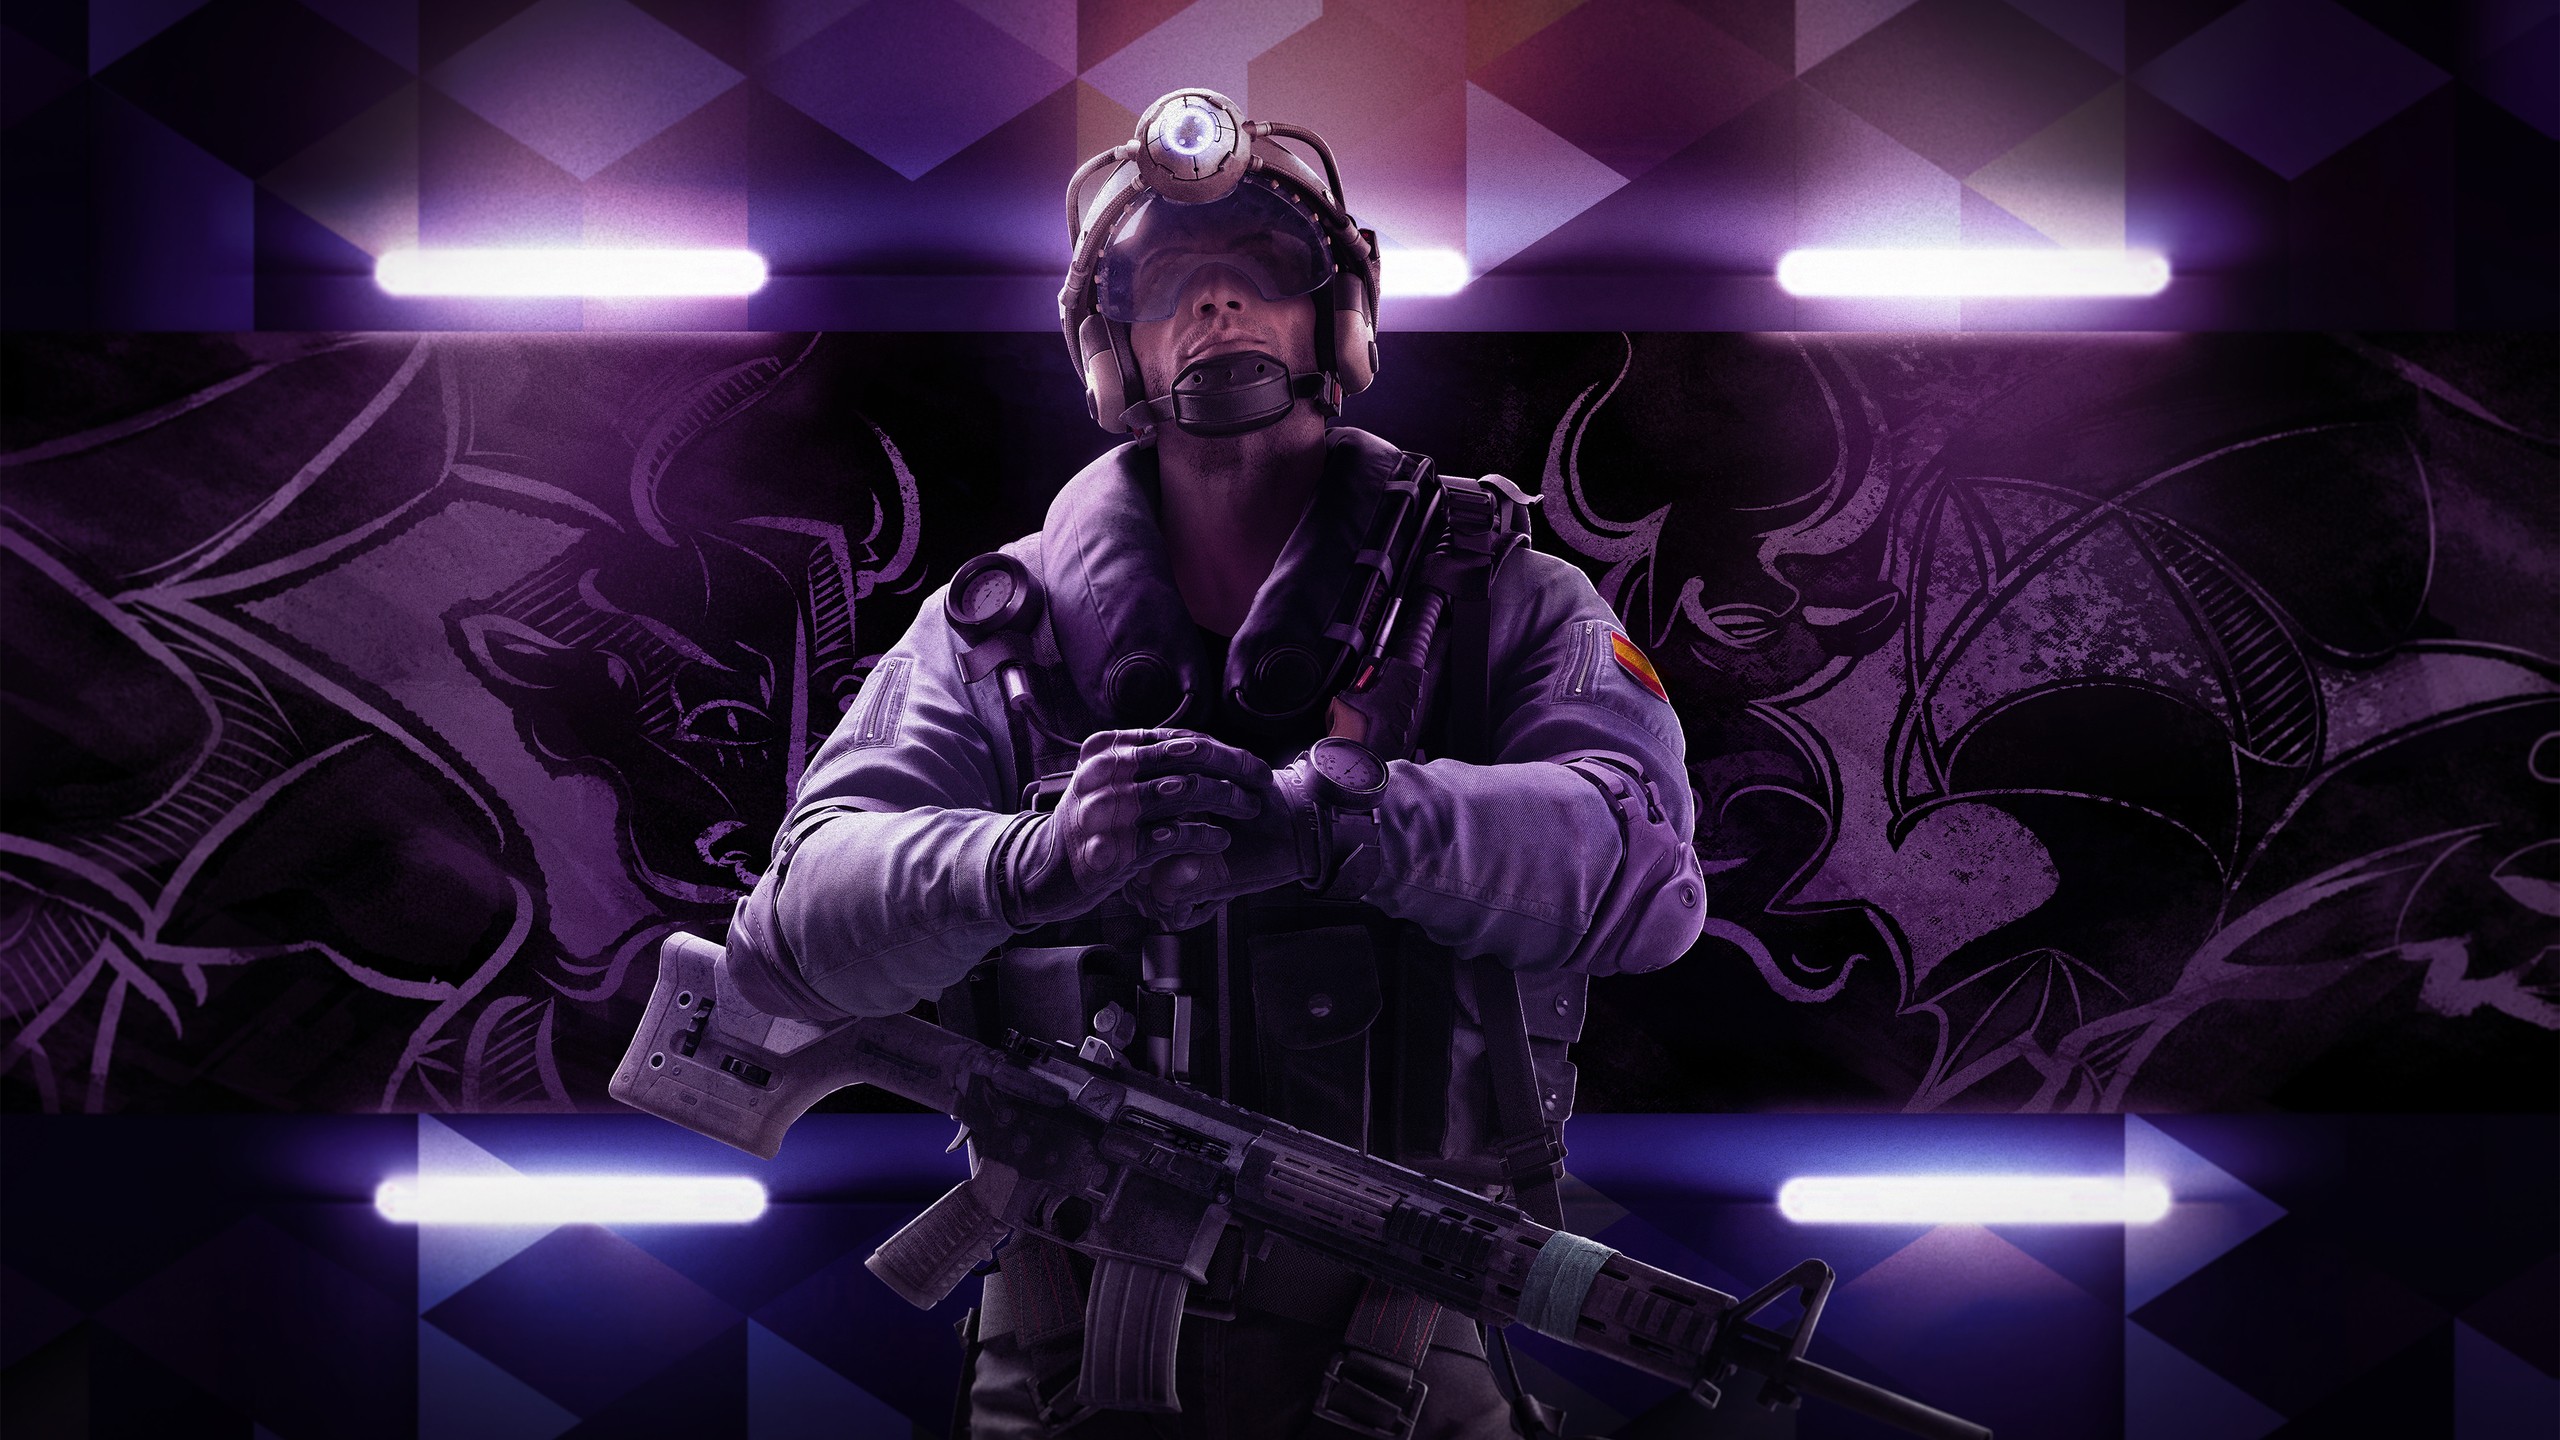 Spanish, PC gaming, Rainbow Six: Siege, Ubisoft, Military, Special forces, Ibiza, DLC Wallpaper